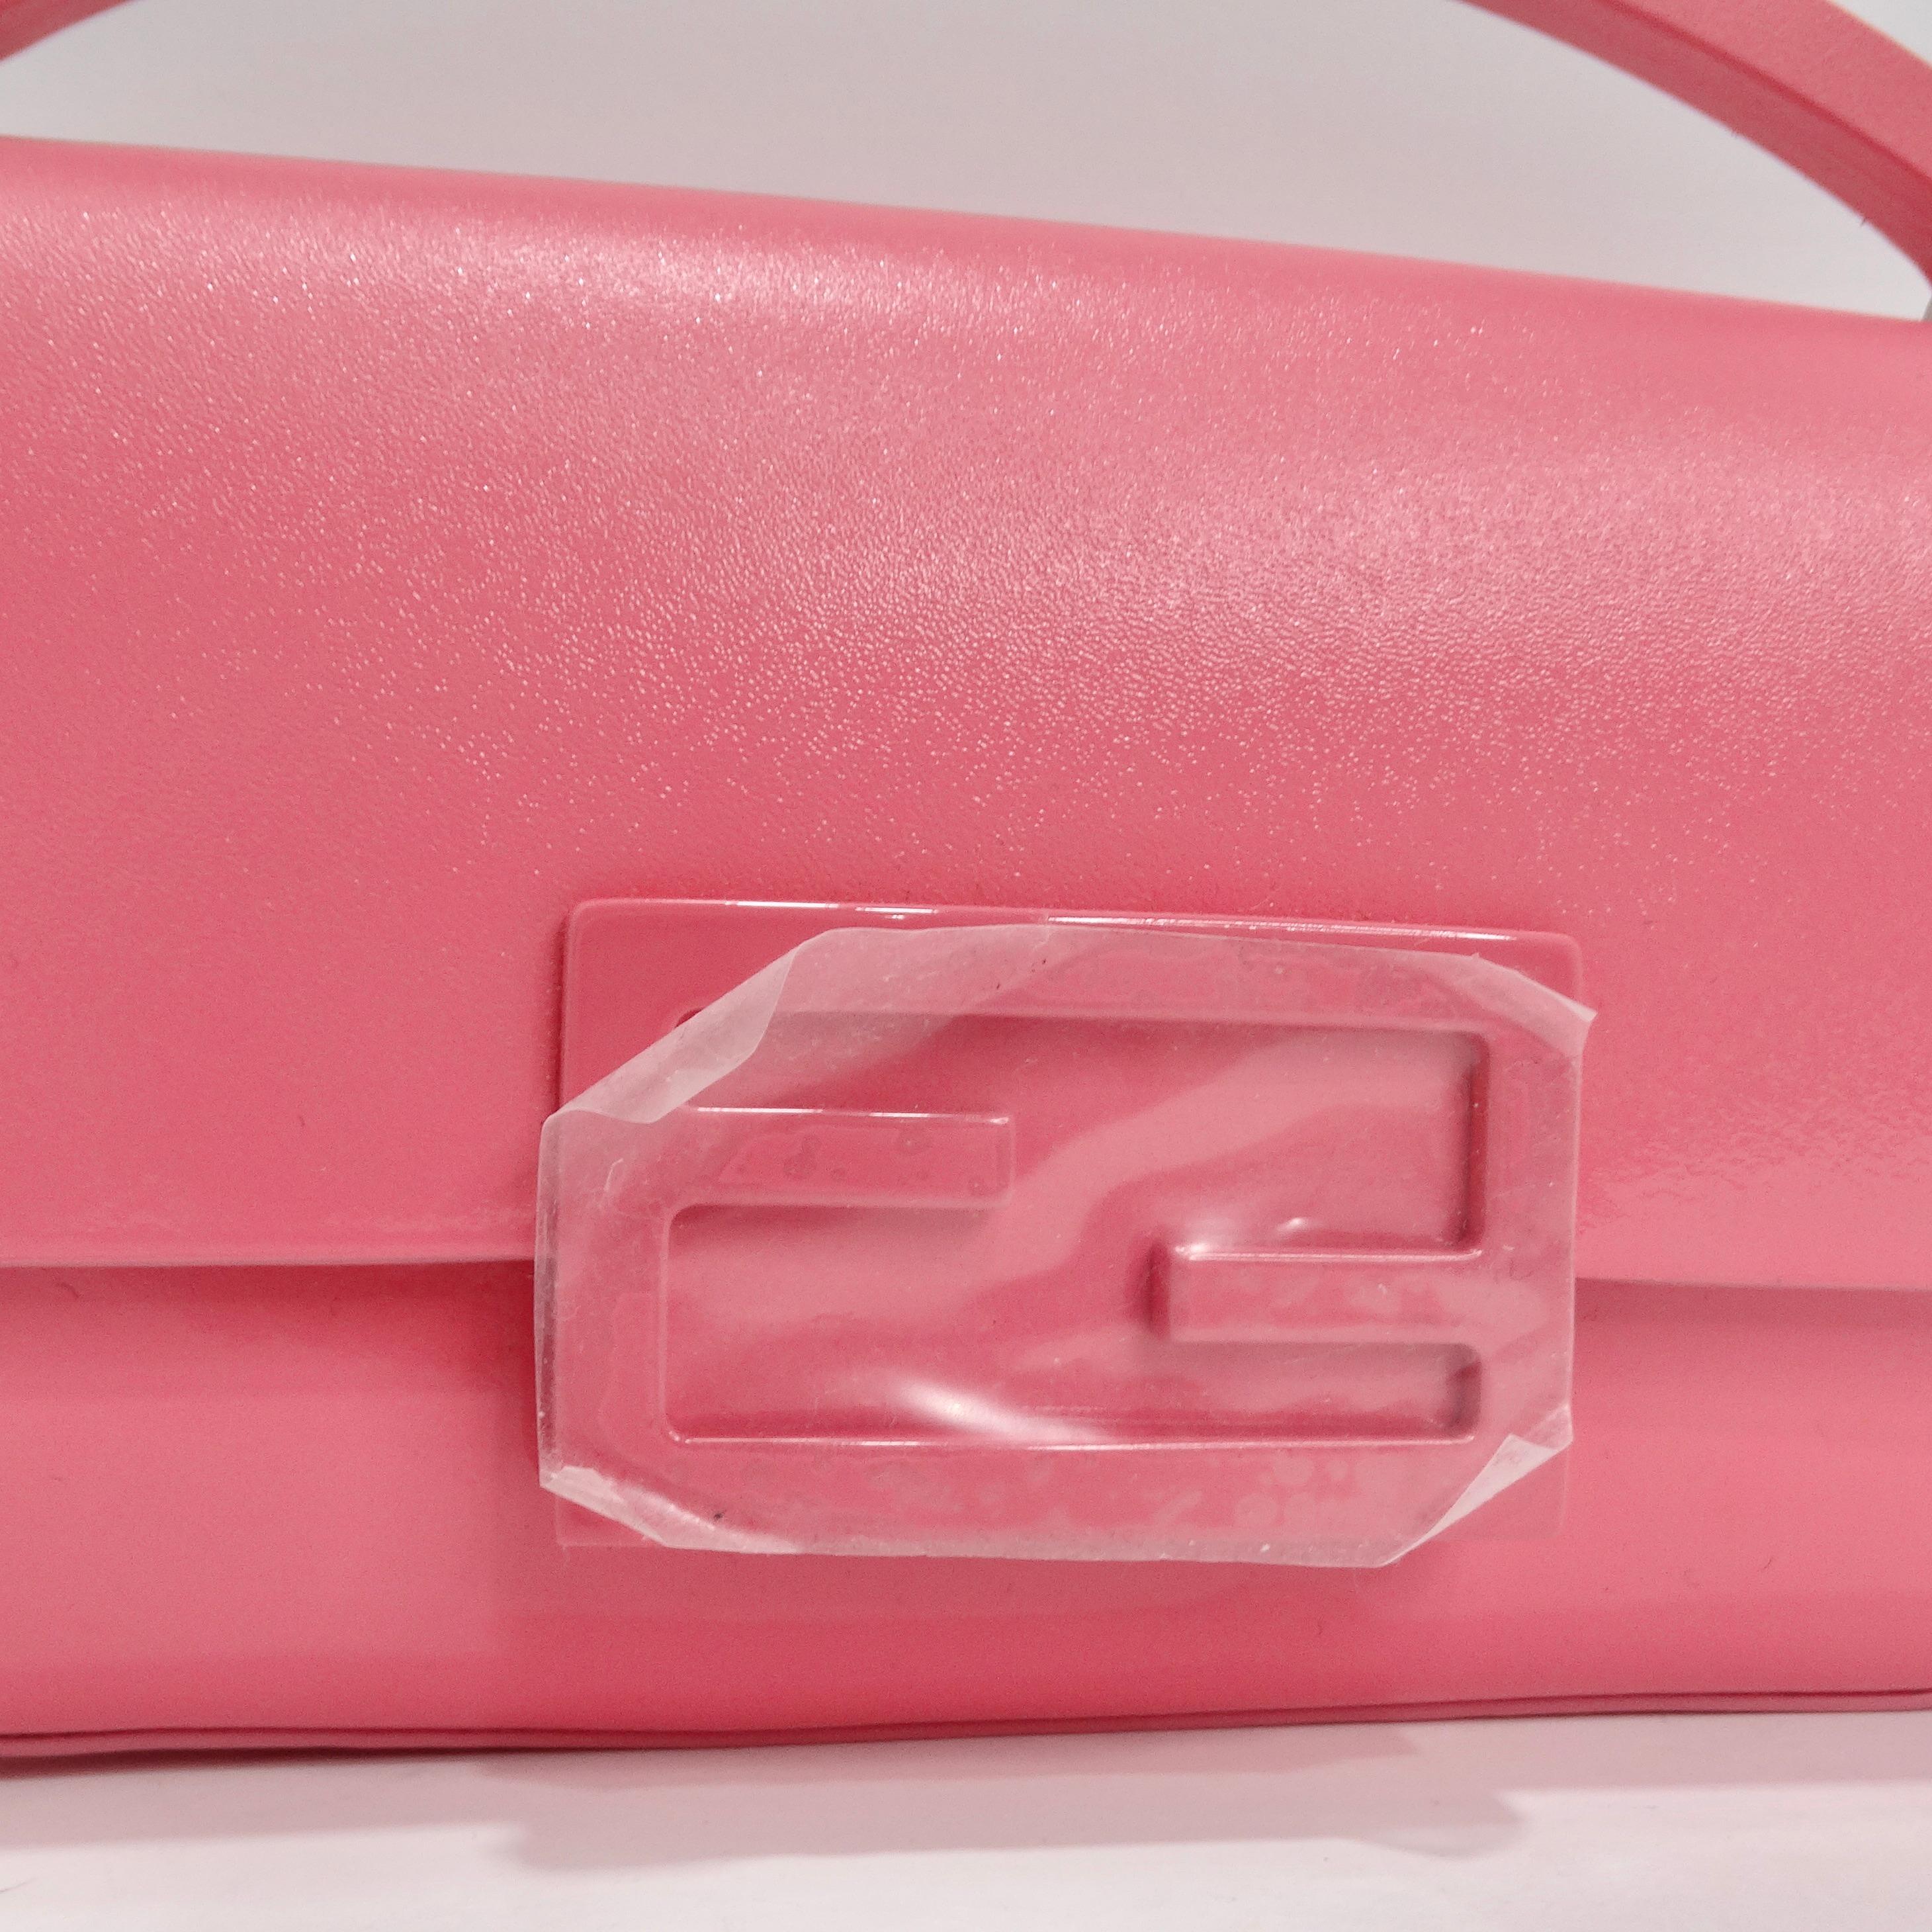 Introducing the Fendi Baguette Phone Pouch in a delightful Rose Pink patent leather, the epitome of compact and chic luxury. This Fendi Baguette Phone Pouch is a vision in rose pink patent leather, a color that exudes femininity and elegance. With